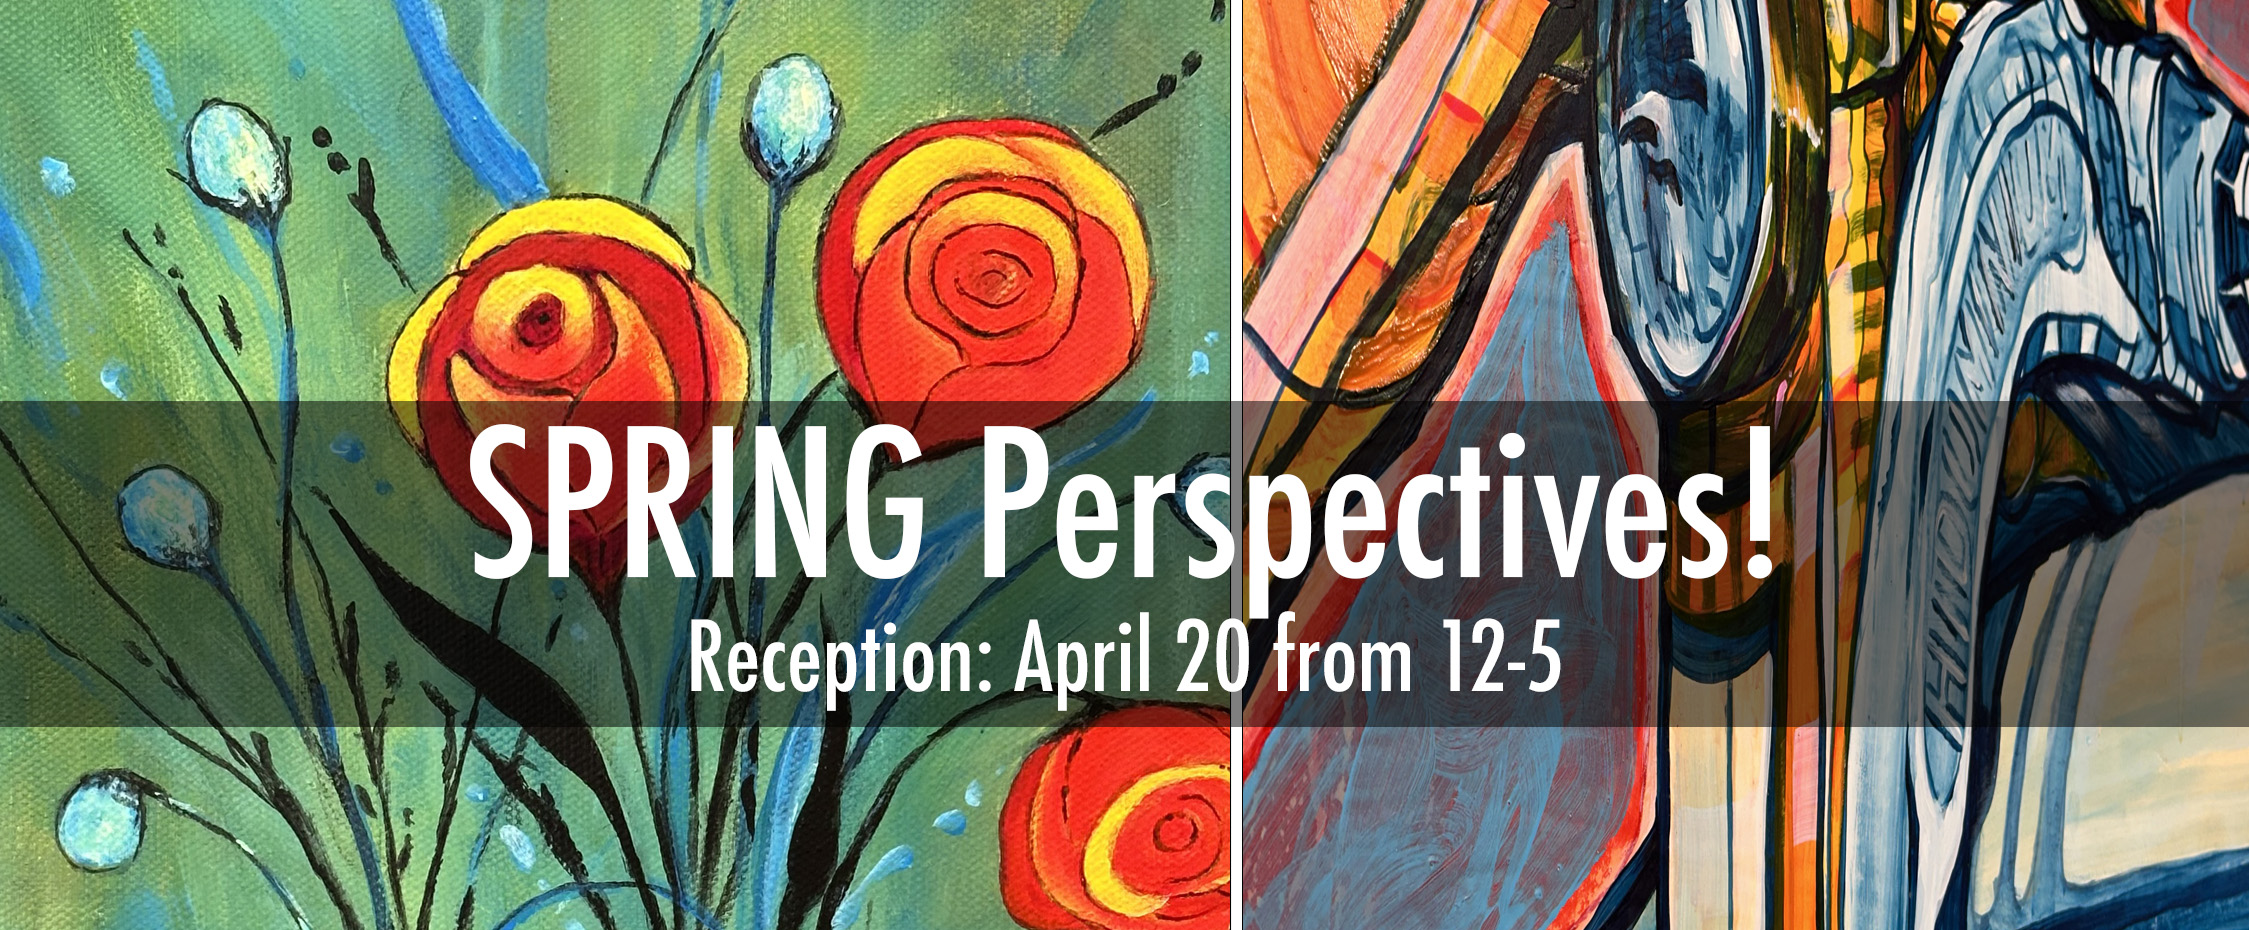 SPRING Perspectives!